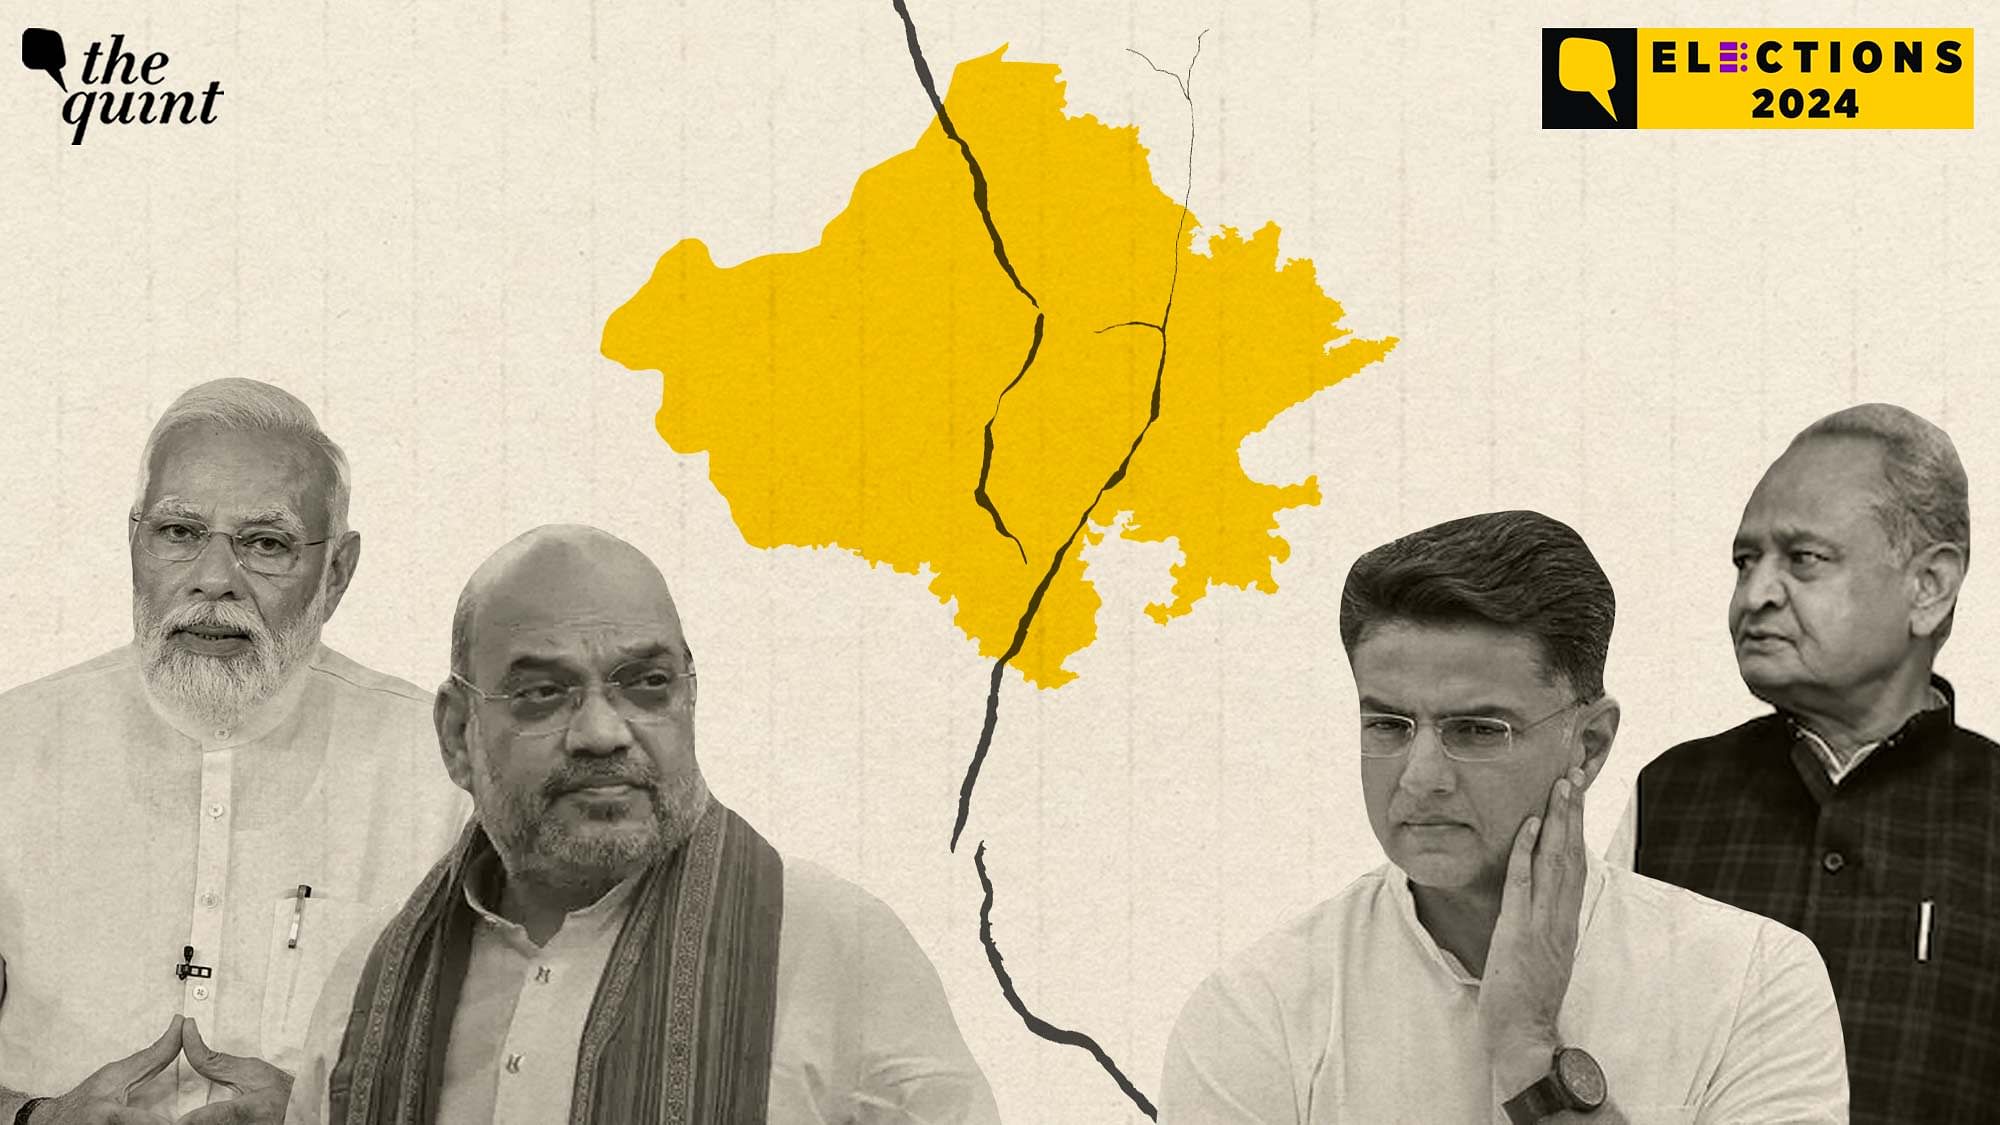 <div class="paragraphs"><p>In defending its seats across Rajasthan, the BJP has campaigned with its big guns blazing. Even in the week between the first and the second phase, the BJP deployed all its top leaders, including Prime Minister <a href="https://www.thequint.com/opinion/indias-youth-unemployment-iran-israel-conflict-agniveer-scheme-uttar-pradesh-lok-sabha-elections">Narendra Modi</a>, Home Minister Amit Shah, and Uttar Pradesh CM Yogi Adityanath to woo voters in Rajasthan.</p></div>